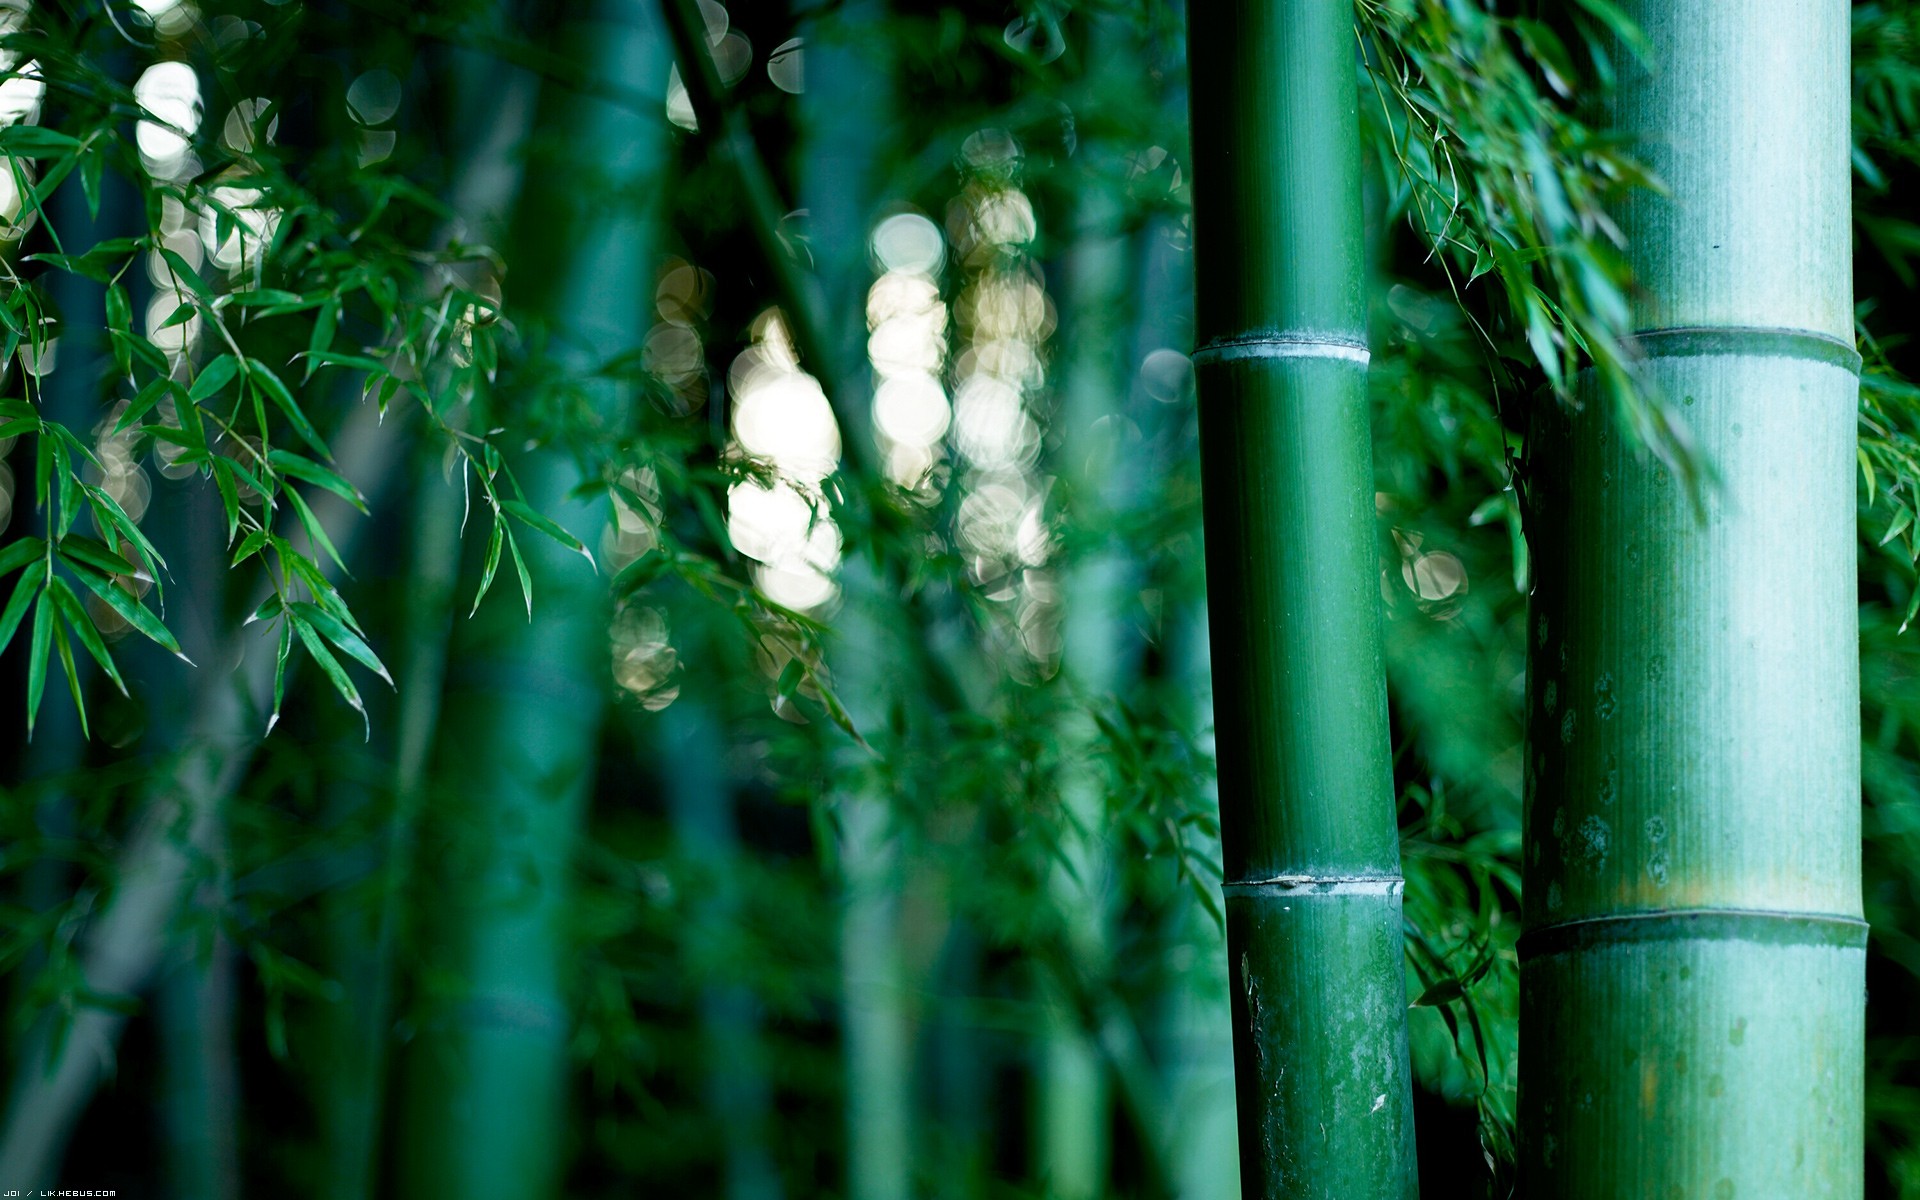 Bamboo Forest Wallpapers